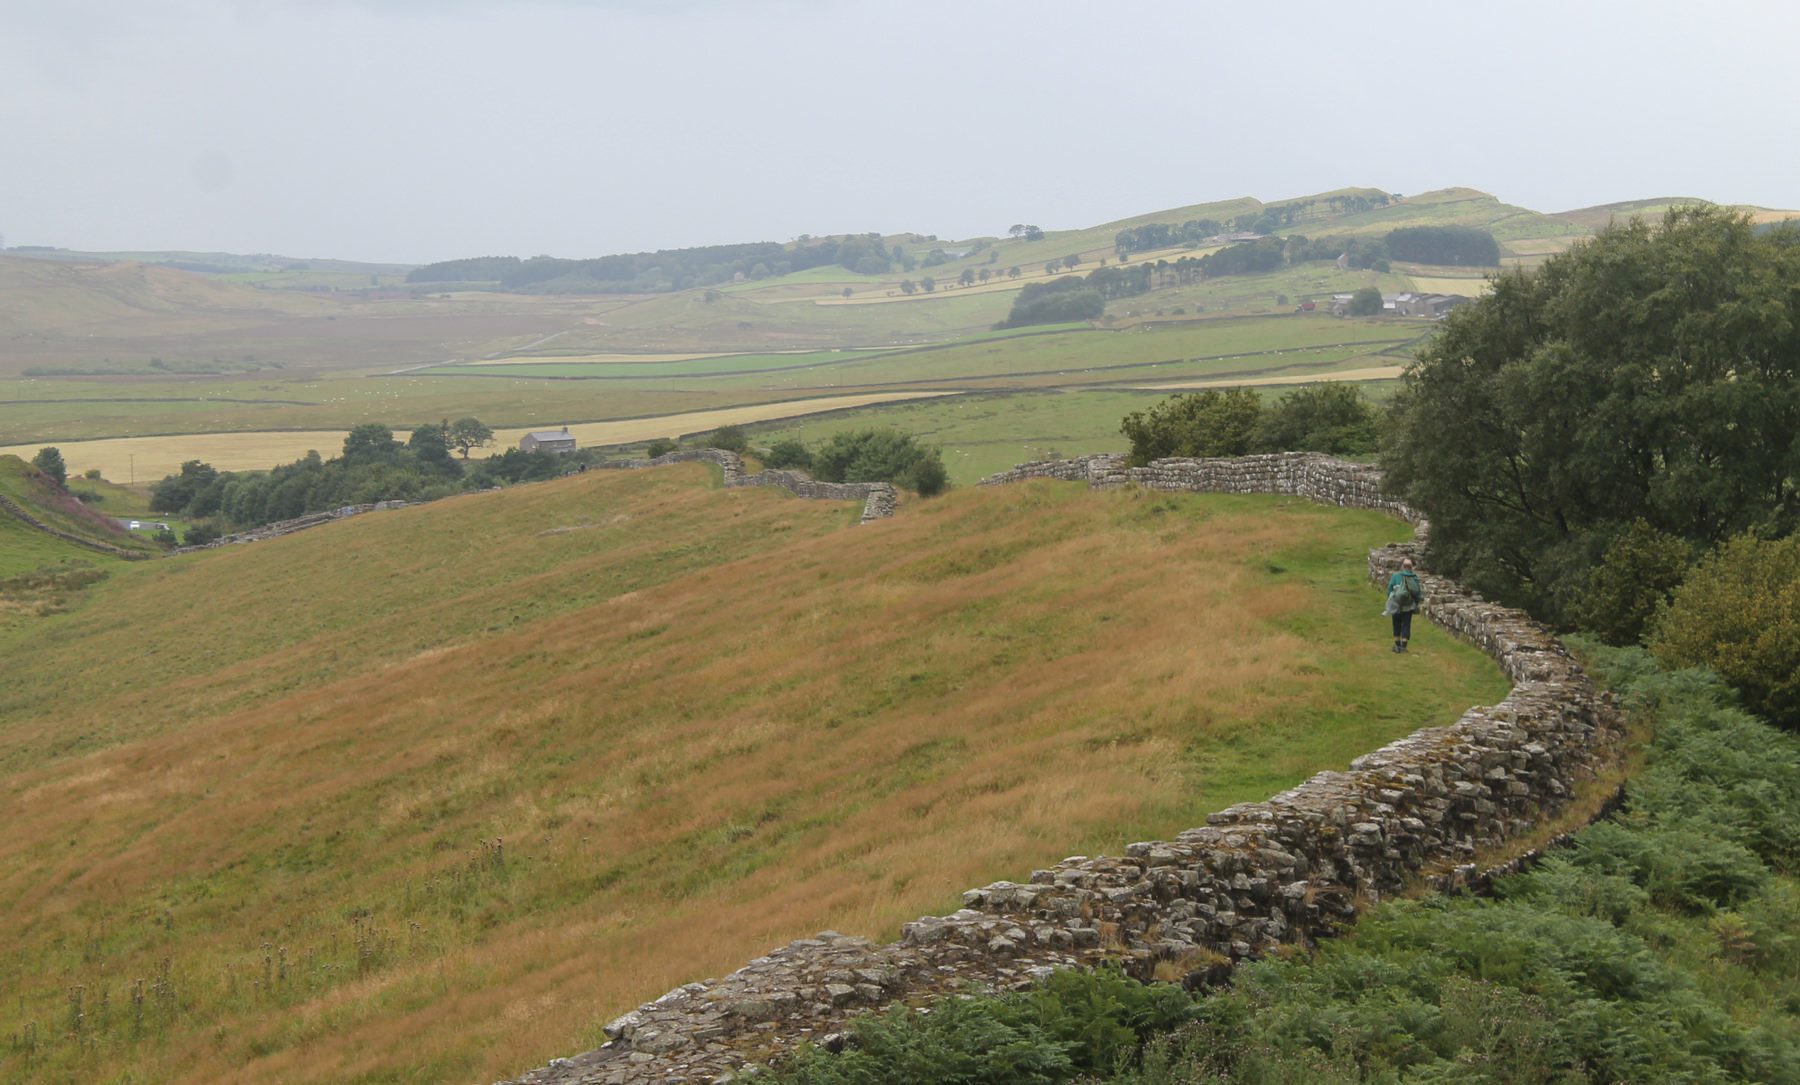 Walking along the wall. The fields are green and yellow and the wall stretches off into the distance 